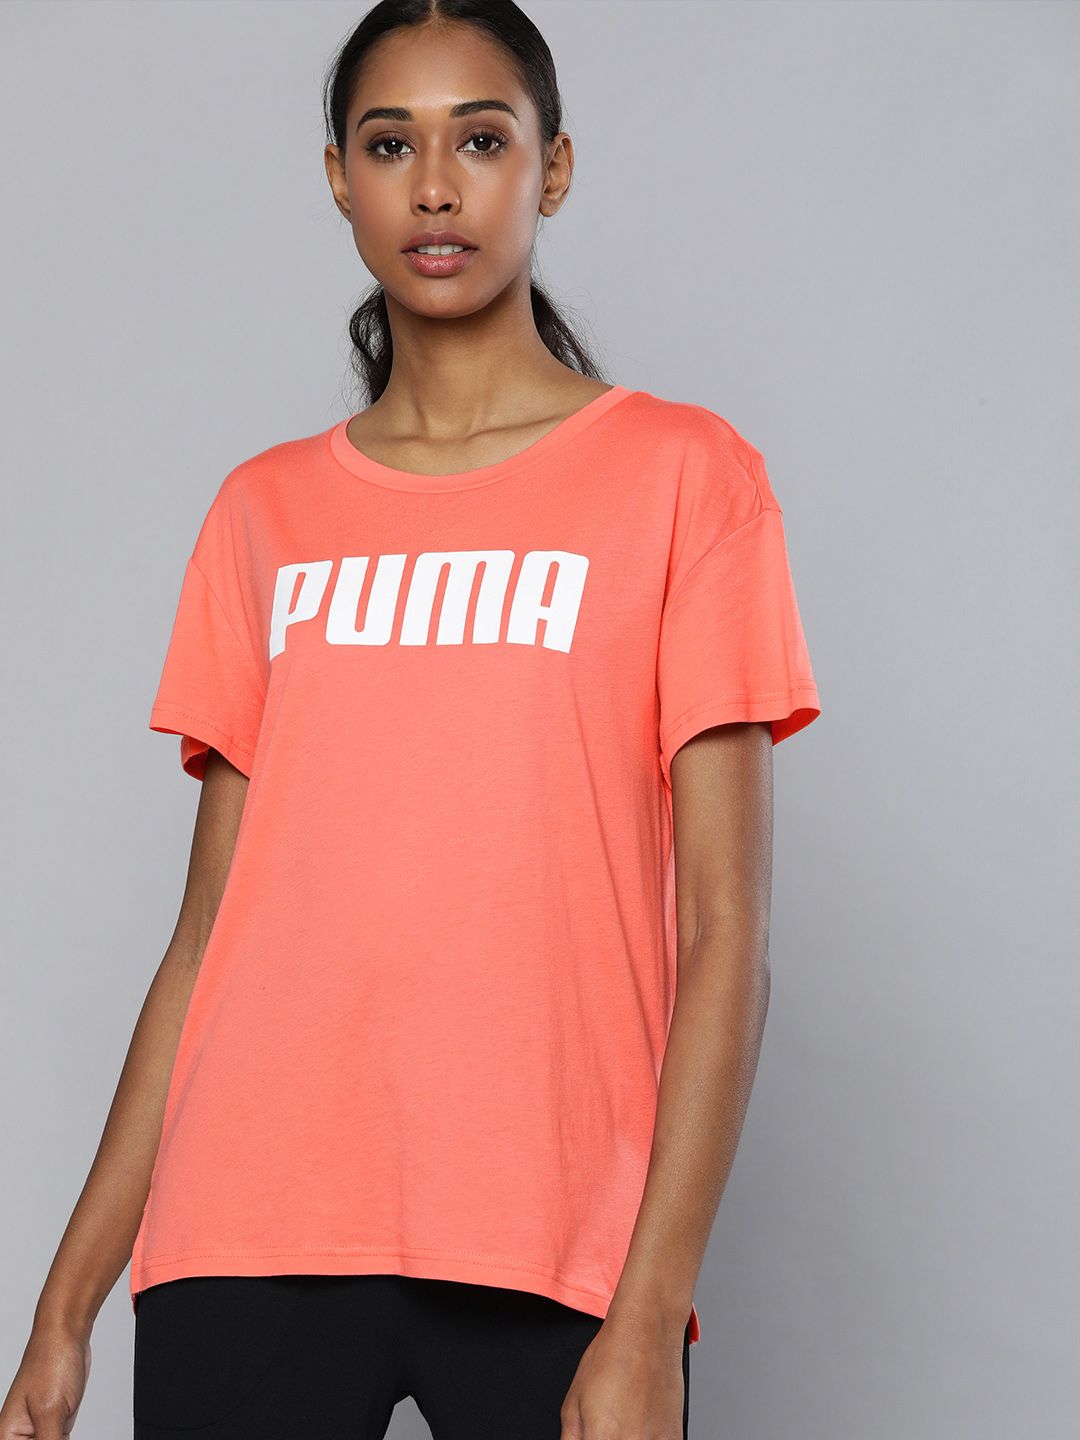 Puma Women Peach-Coloured dryCELL RTG Relaxed Fit Brand Logo Printed T-shirt Price in India